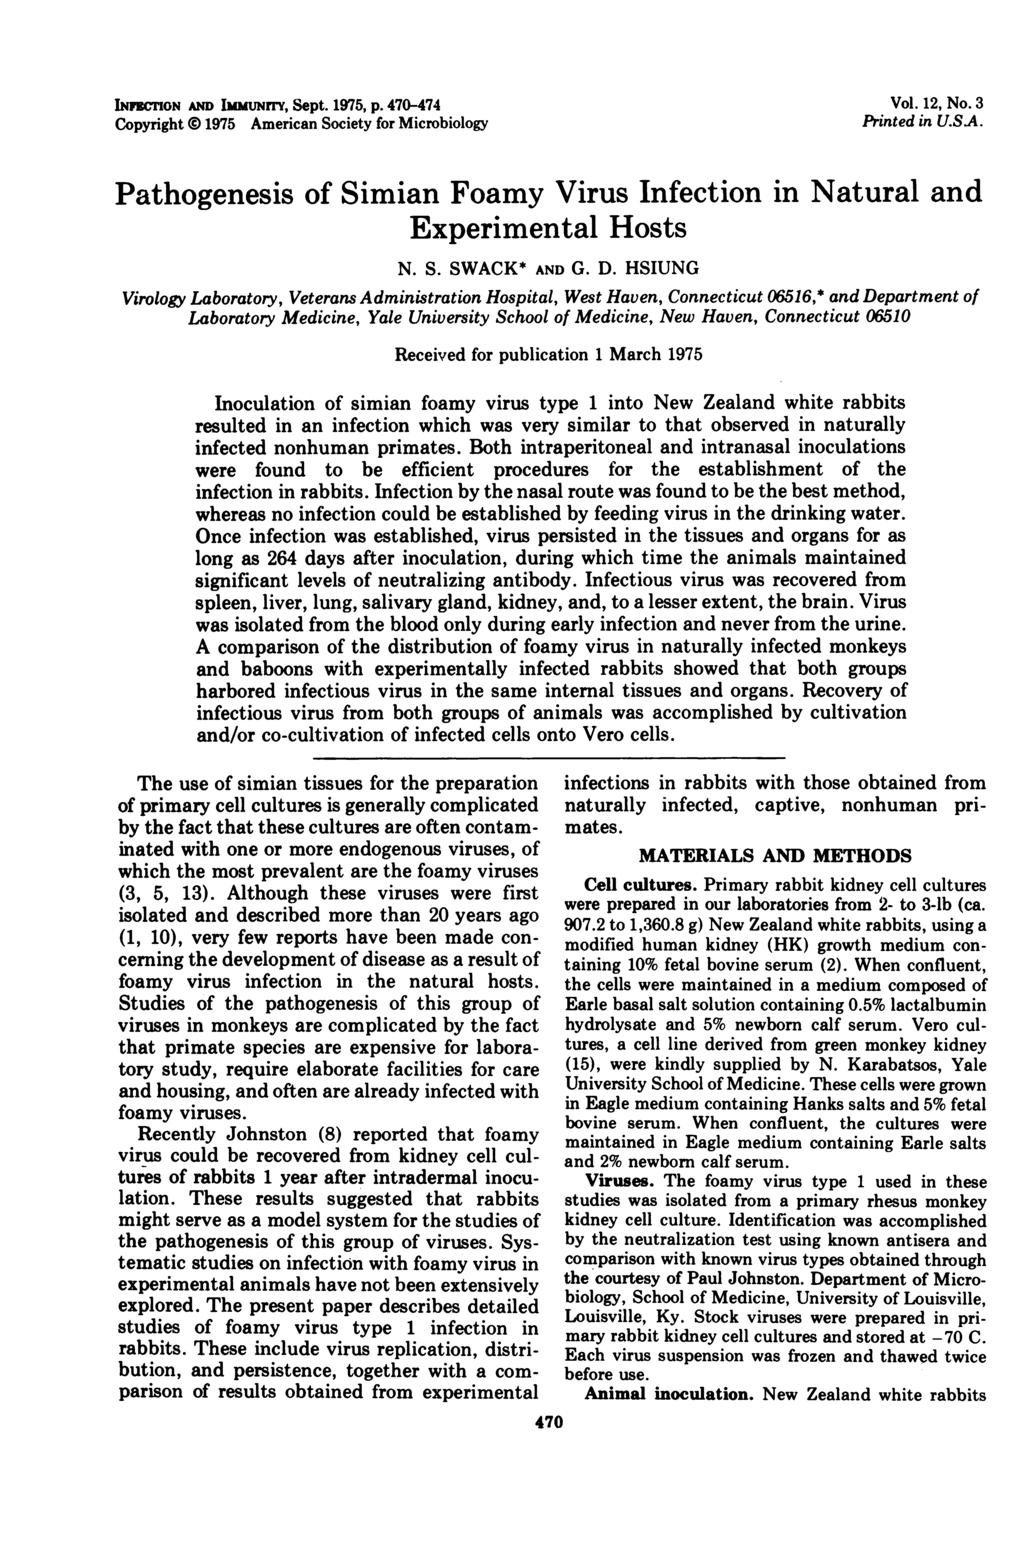 INCTION AD ImmuNrry, Sept. 1975, p. 470-474 Copyright 0 1975 American Society for Microbiology Vol. 12, No. 3 Printed in U.S.A. Pathogenesis of Simian Foamy Virus Infection in Natural and Experimental Hosts N.